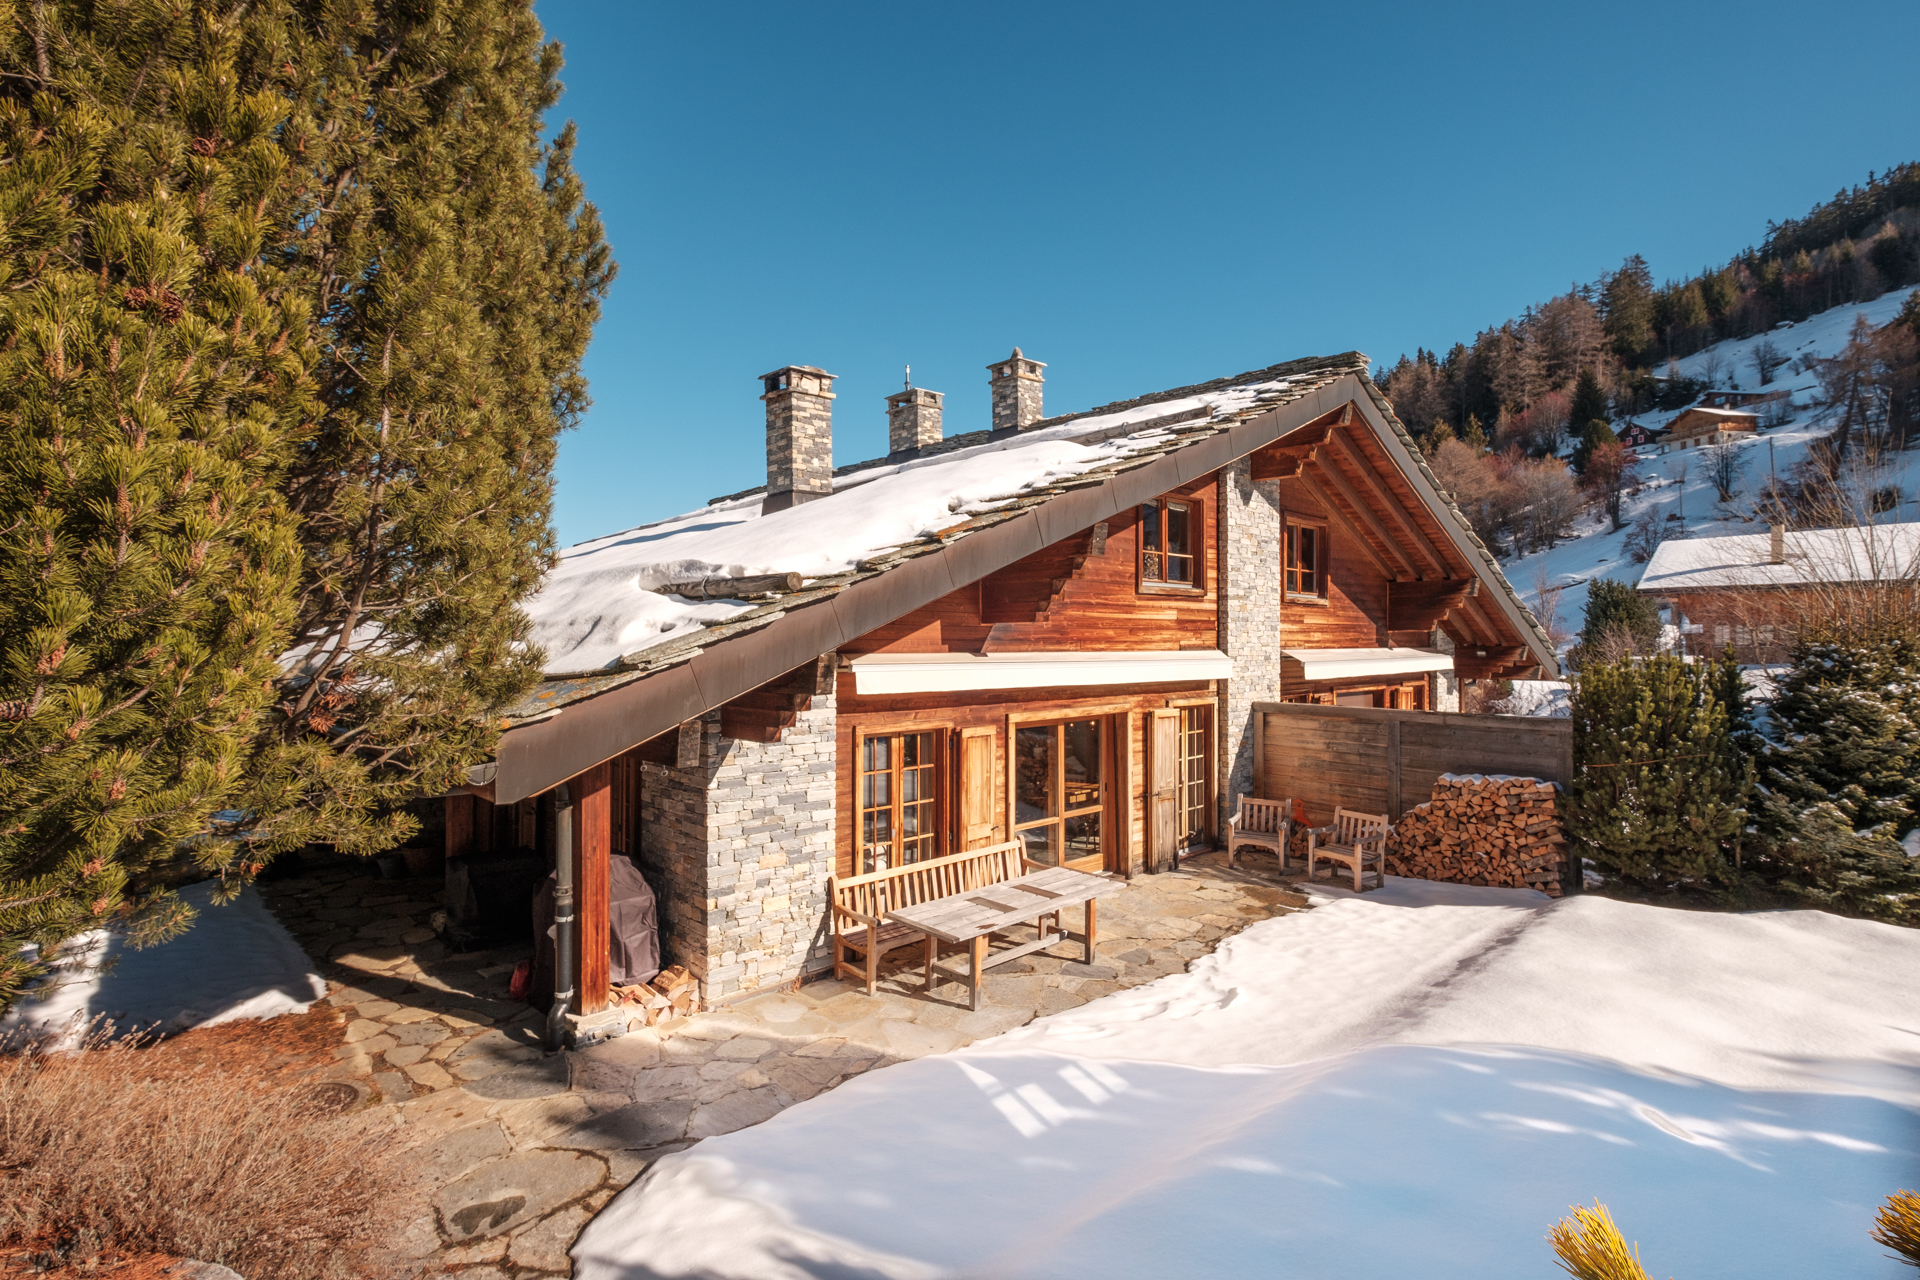 The ski chalet for sale